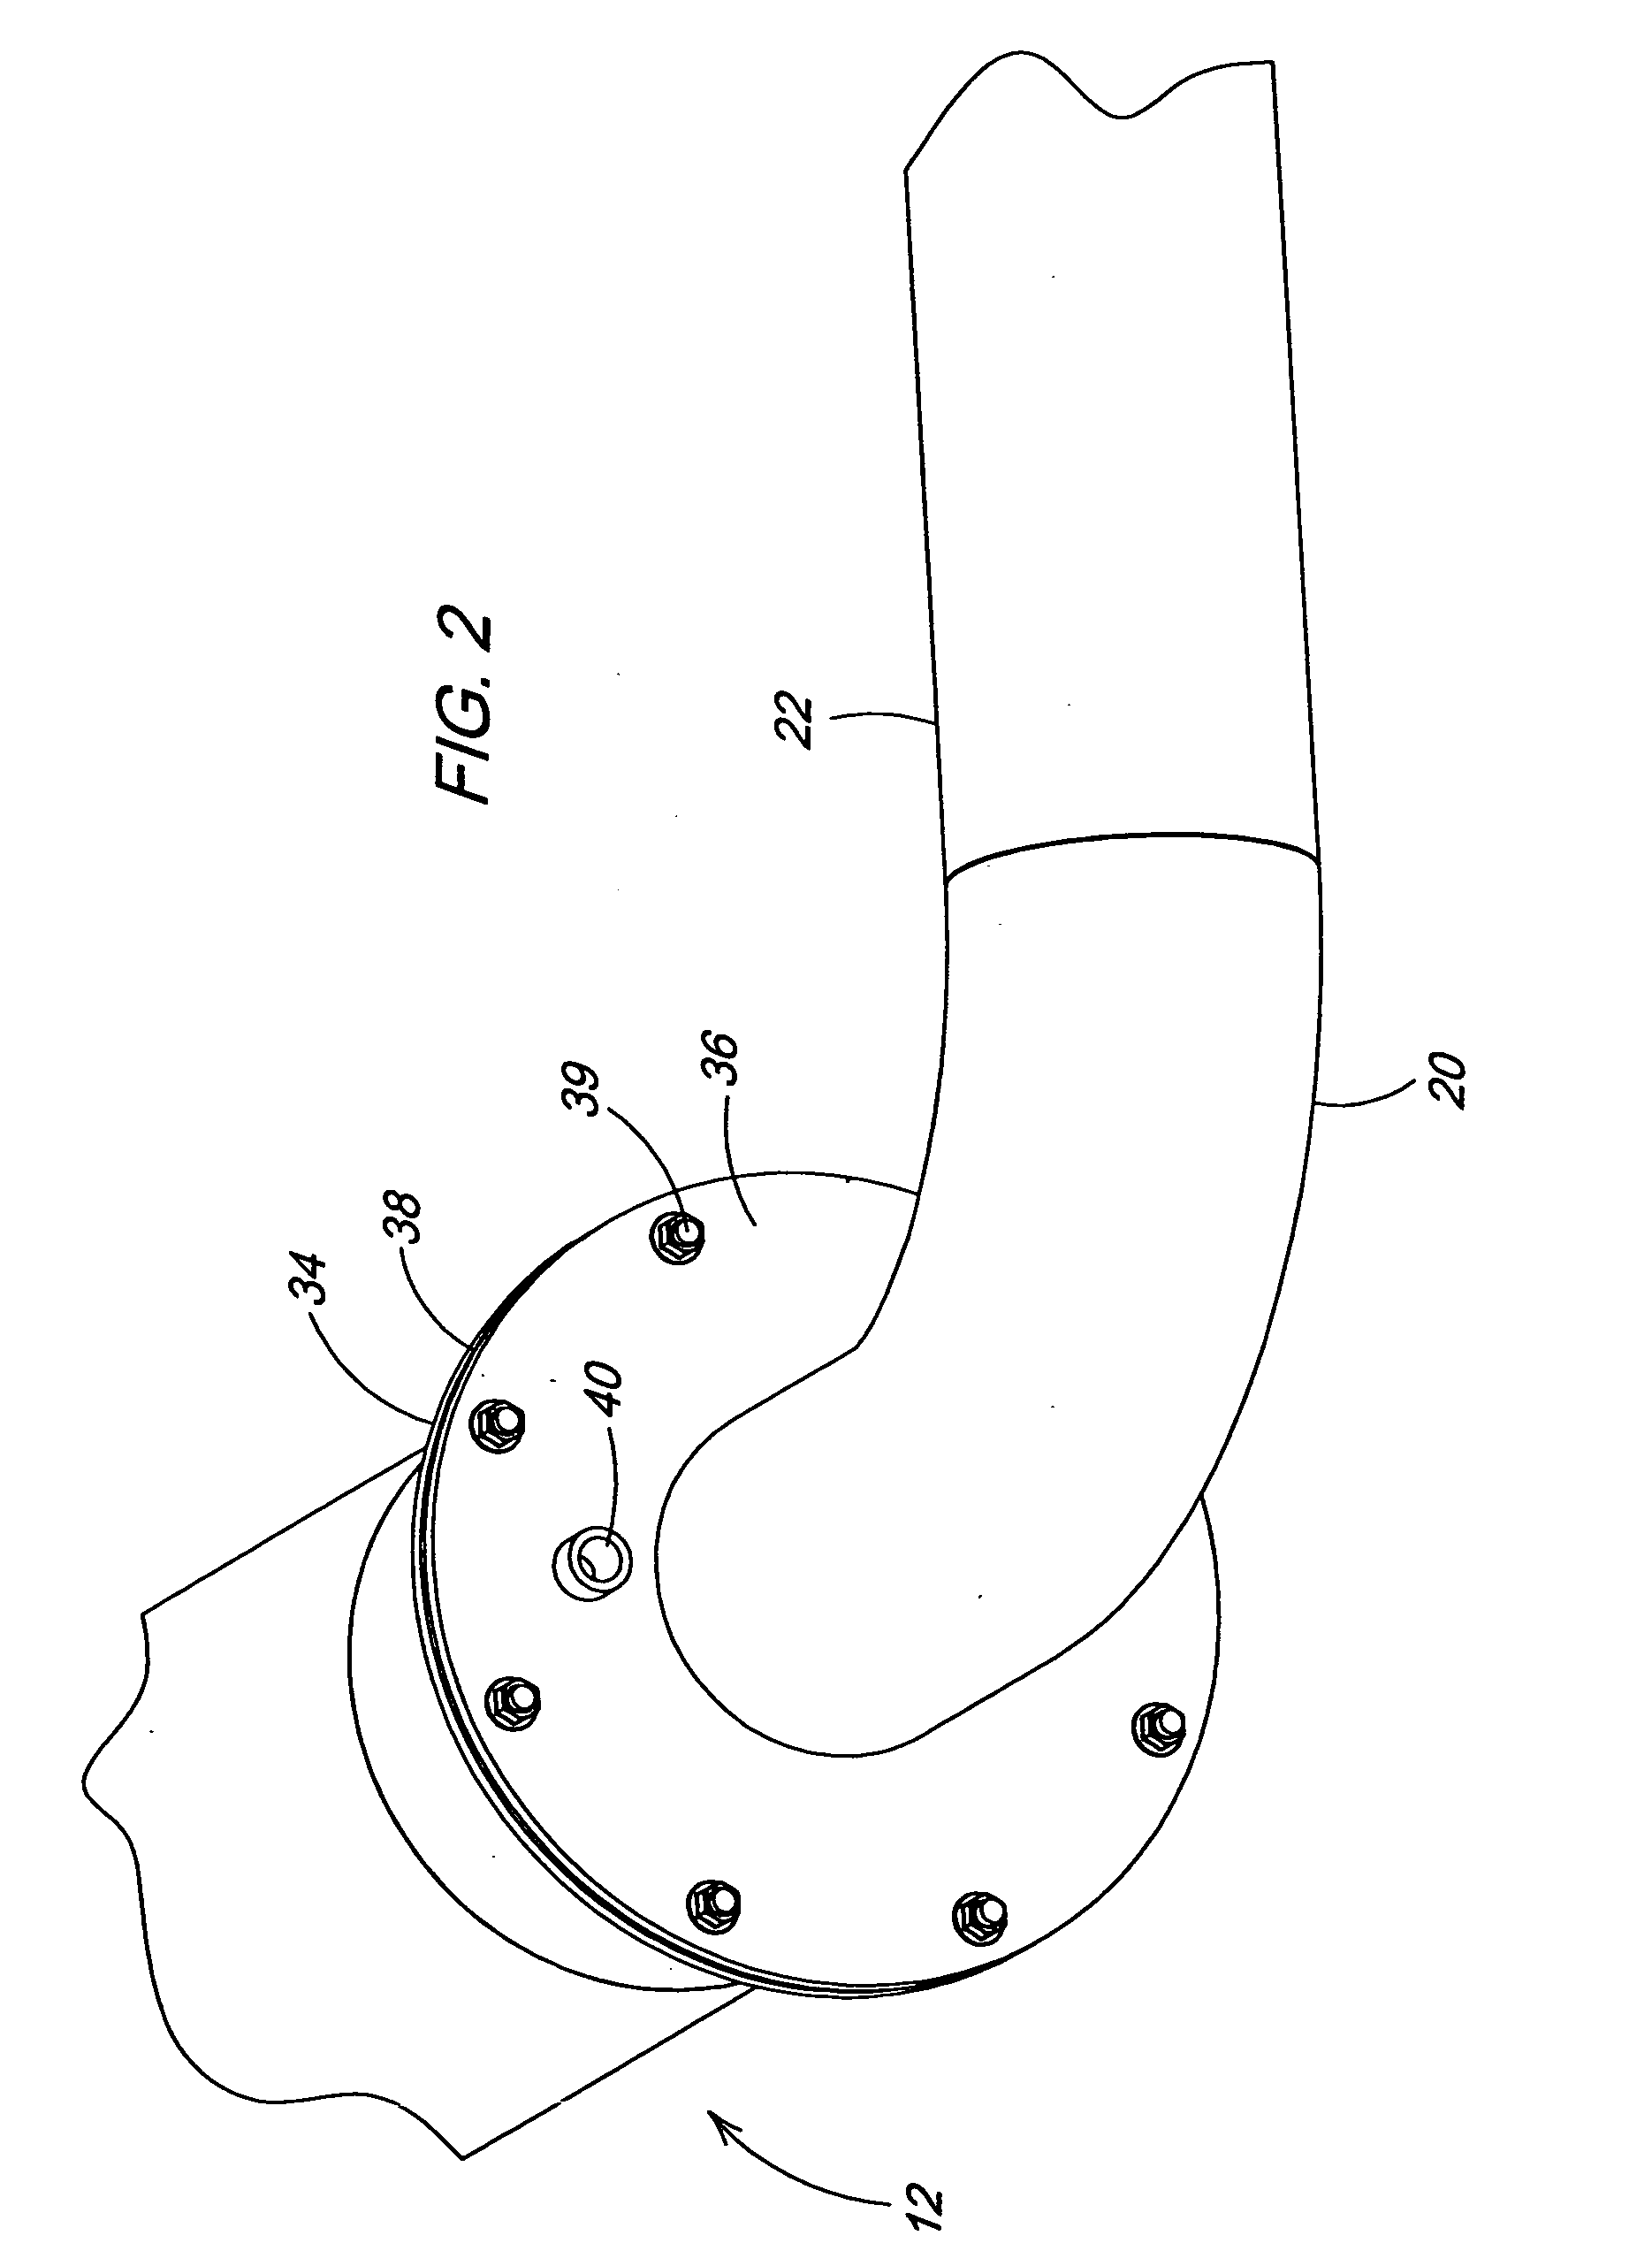 Combustion chamber design with water injection for direct-fired steam generator and for being cooled by the water